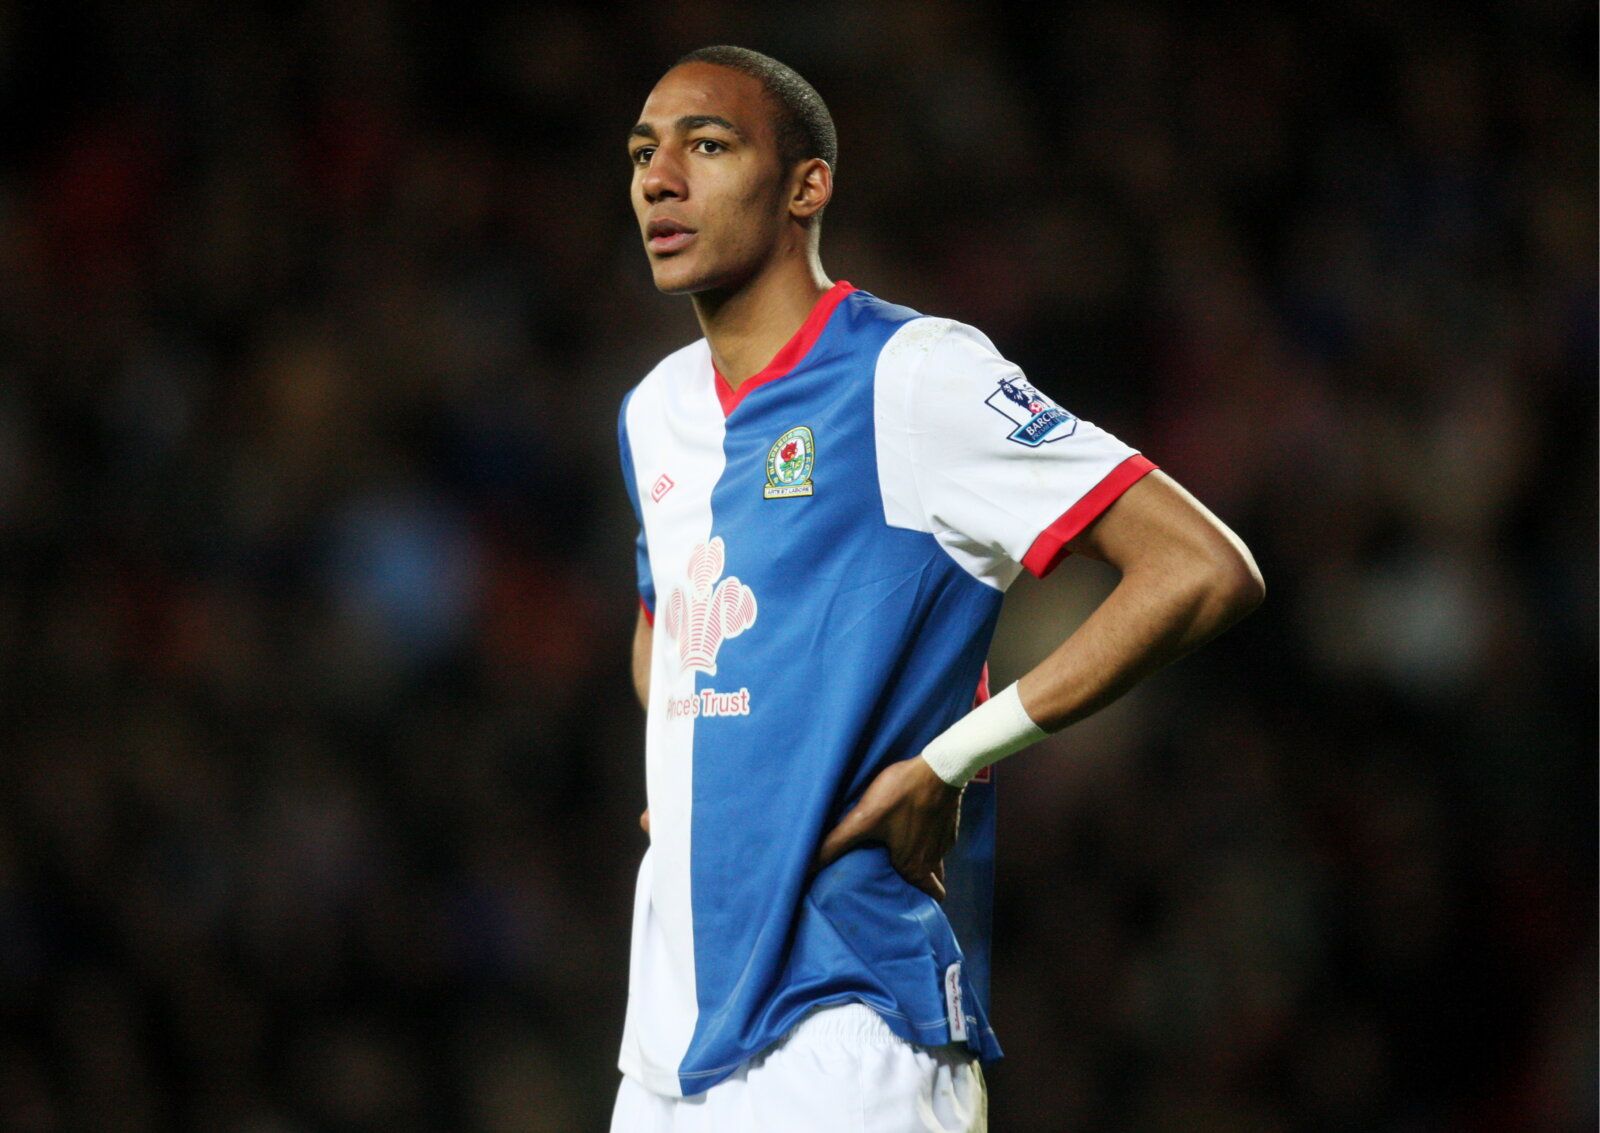 Football - Blackburn Rovers v Liverpool - Barclays Premier League  - Ewood Park - 11/12 - 10/4/12 
Steven N'Zonzi - Blackburn Rovers  
Mandatory Credit: Action Images / Carl Recine 
EDITORIAL USE ONLY. No use with unauthorized audio, video, data, fixture lists, club/league logos or live services. Online in-match use limited to 45 images, no video emulation. No use in betting, games or single club/league/player publications.  Please contact your account representative for further details.